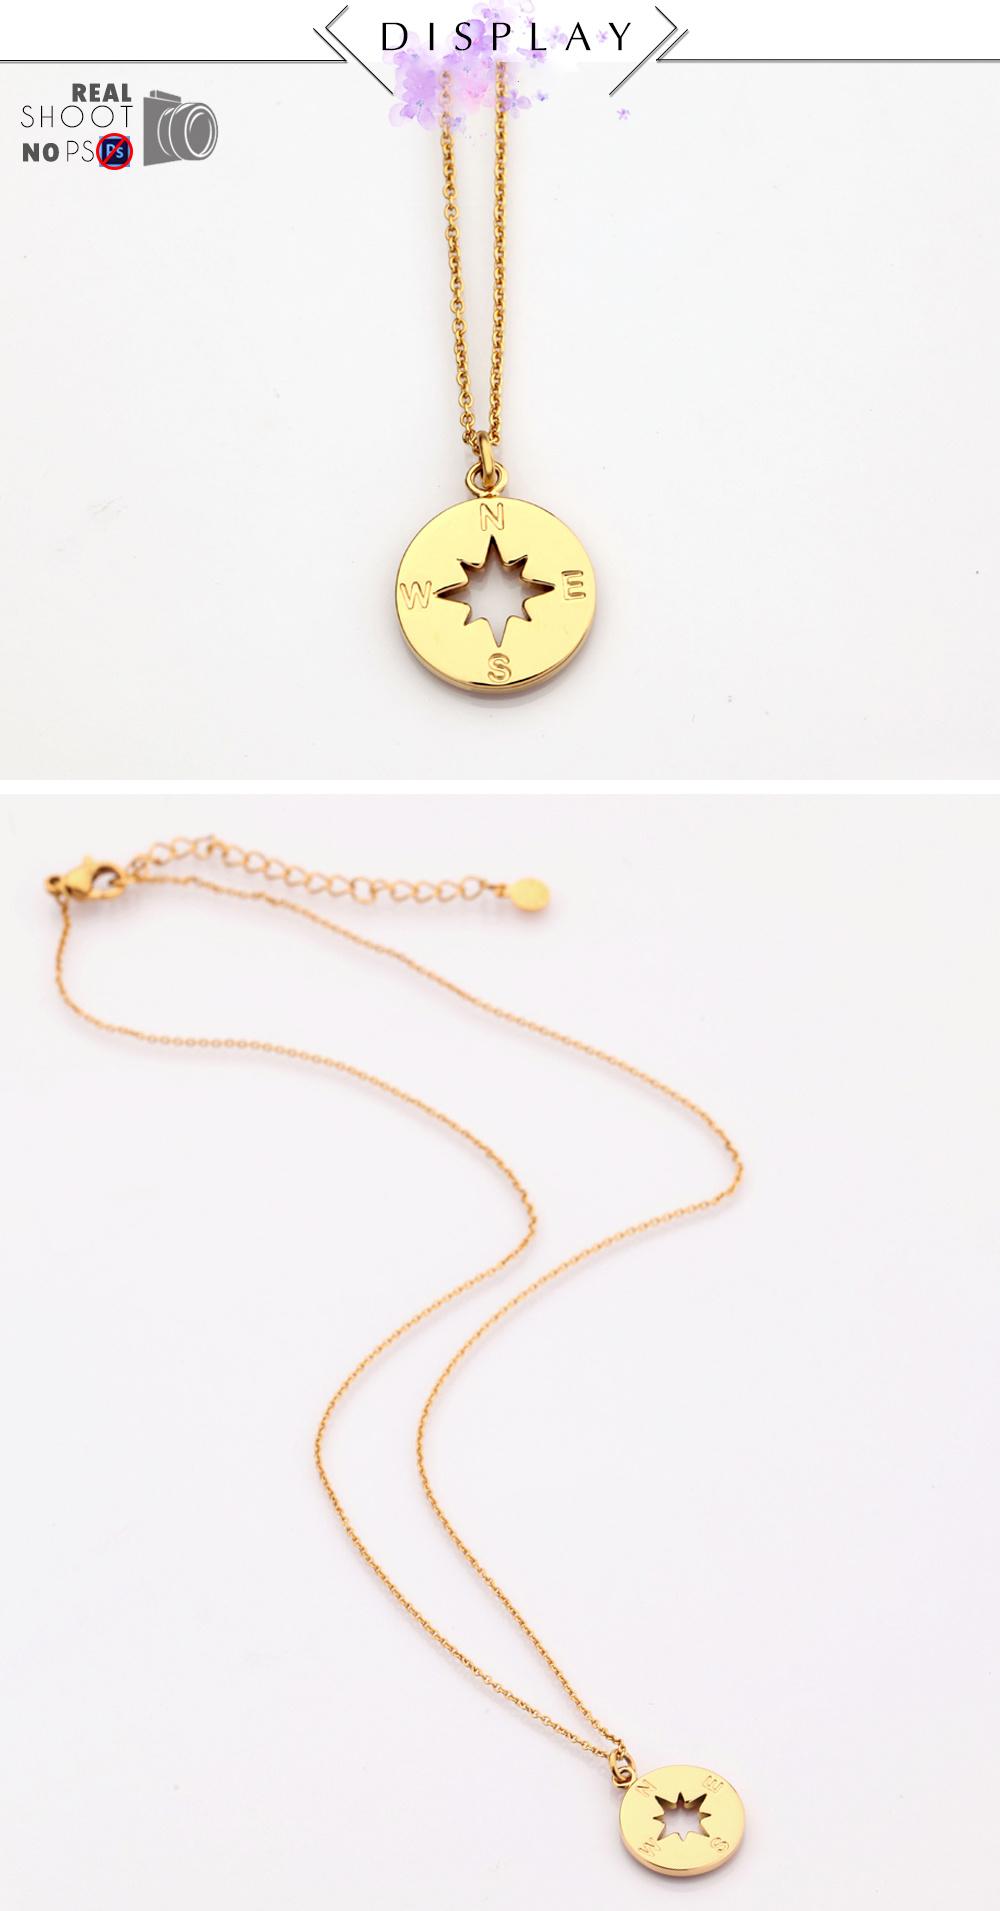 Fashion Jewelry Stainless Steel Hollow out Compass Necklace